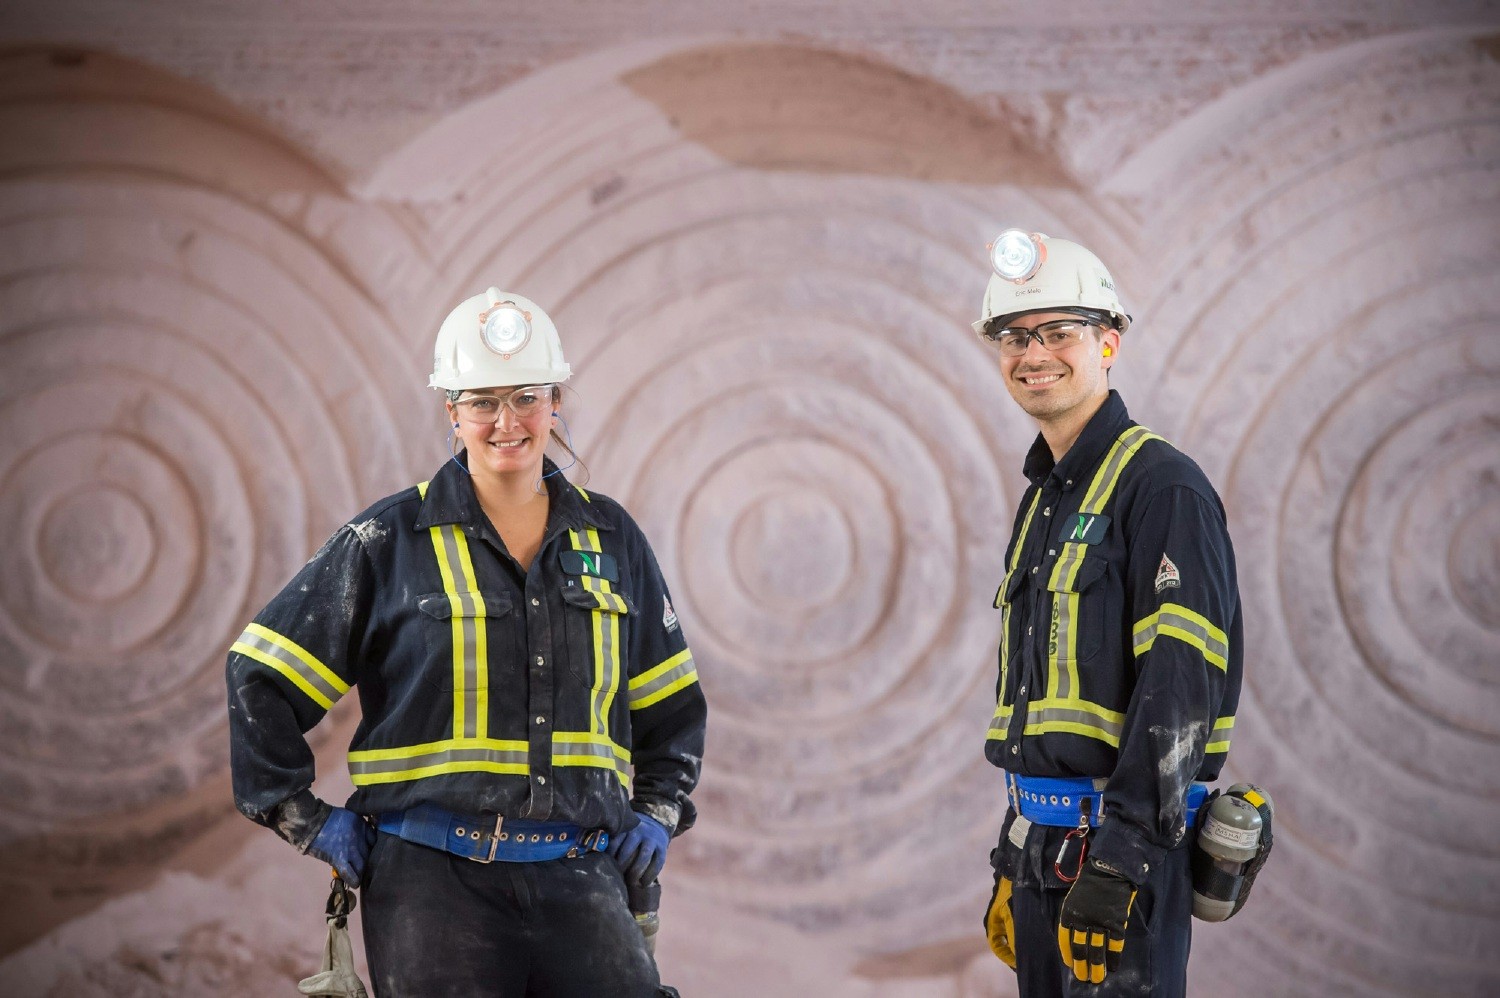 Nutrien is the world's largest potash producer with more than 20 million tons of potash capacity across its six mines.